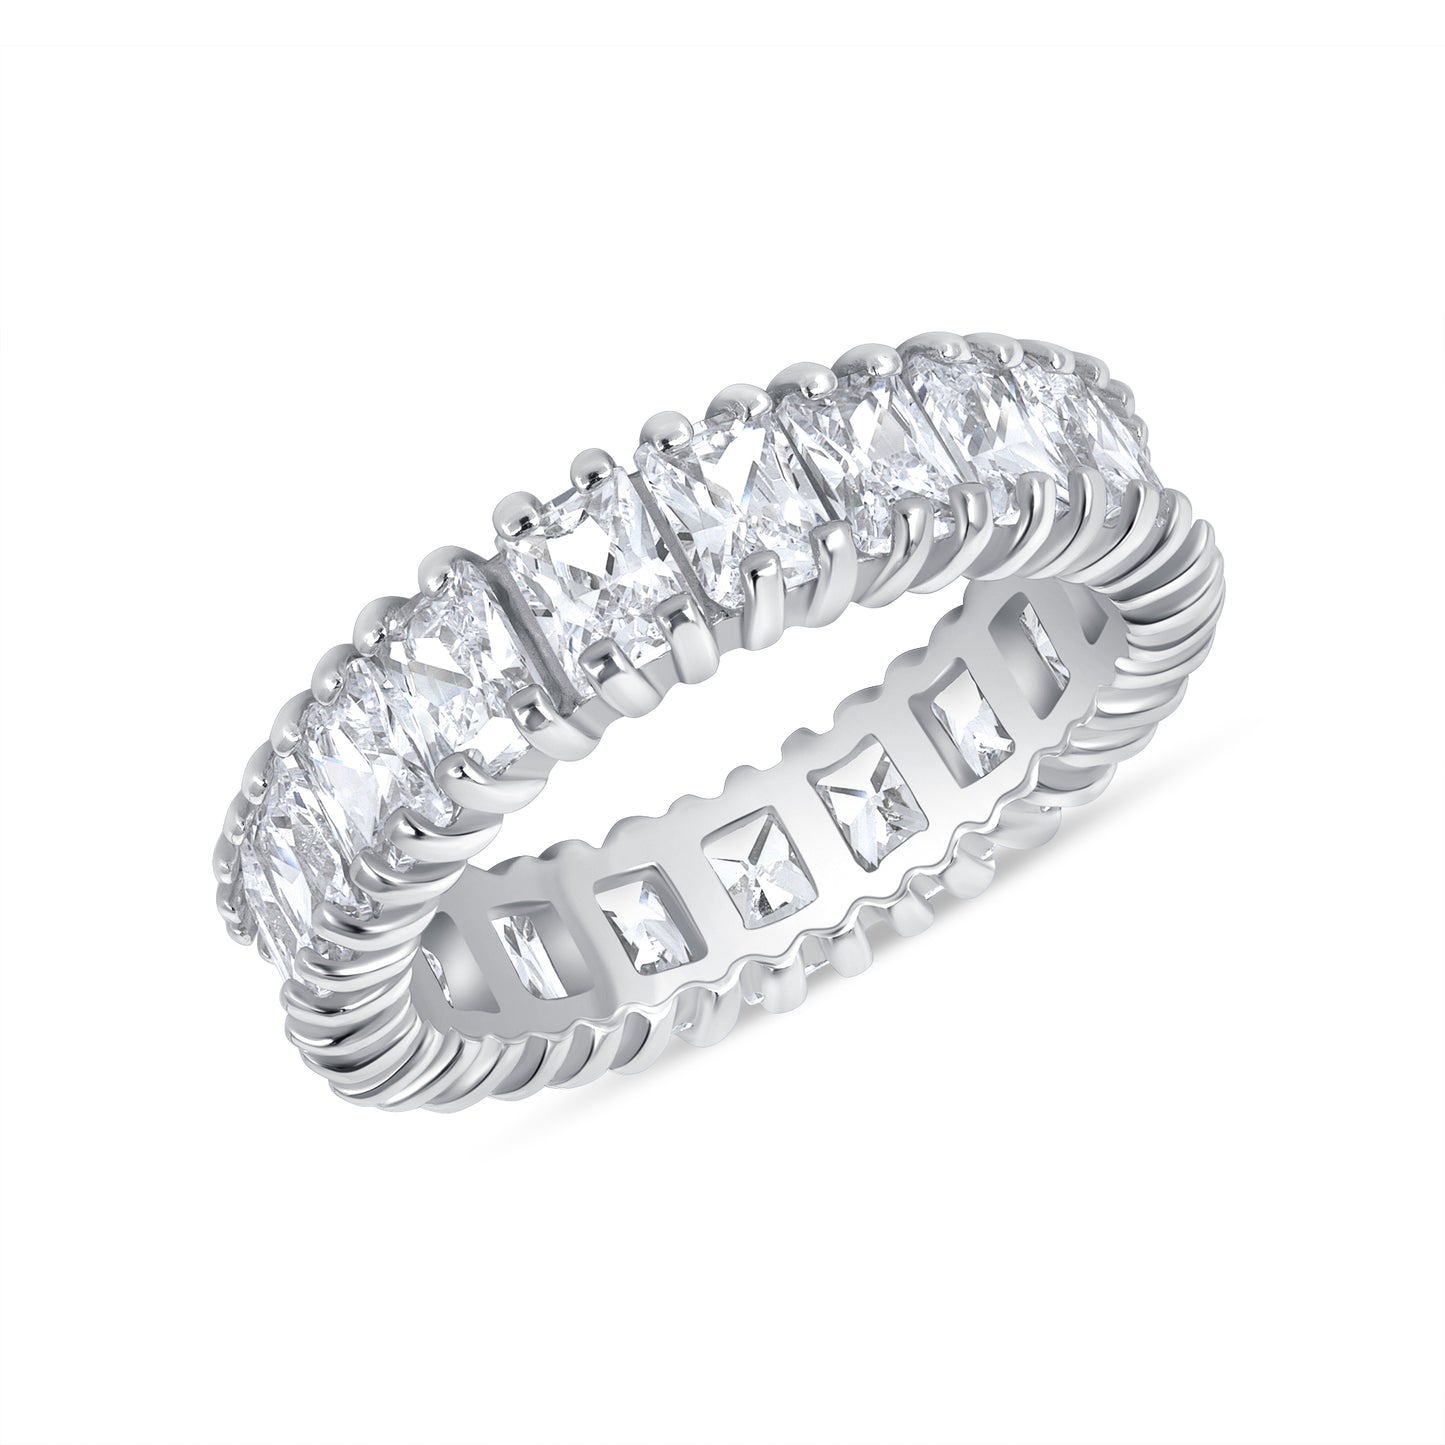 Silver 925 Rhodium Plated Fancy Cubic Zirconia Band Ring. BR13306